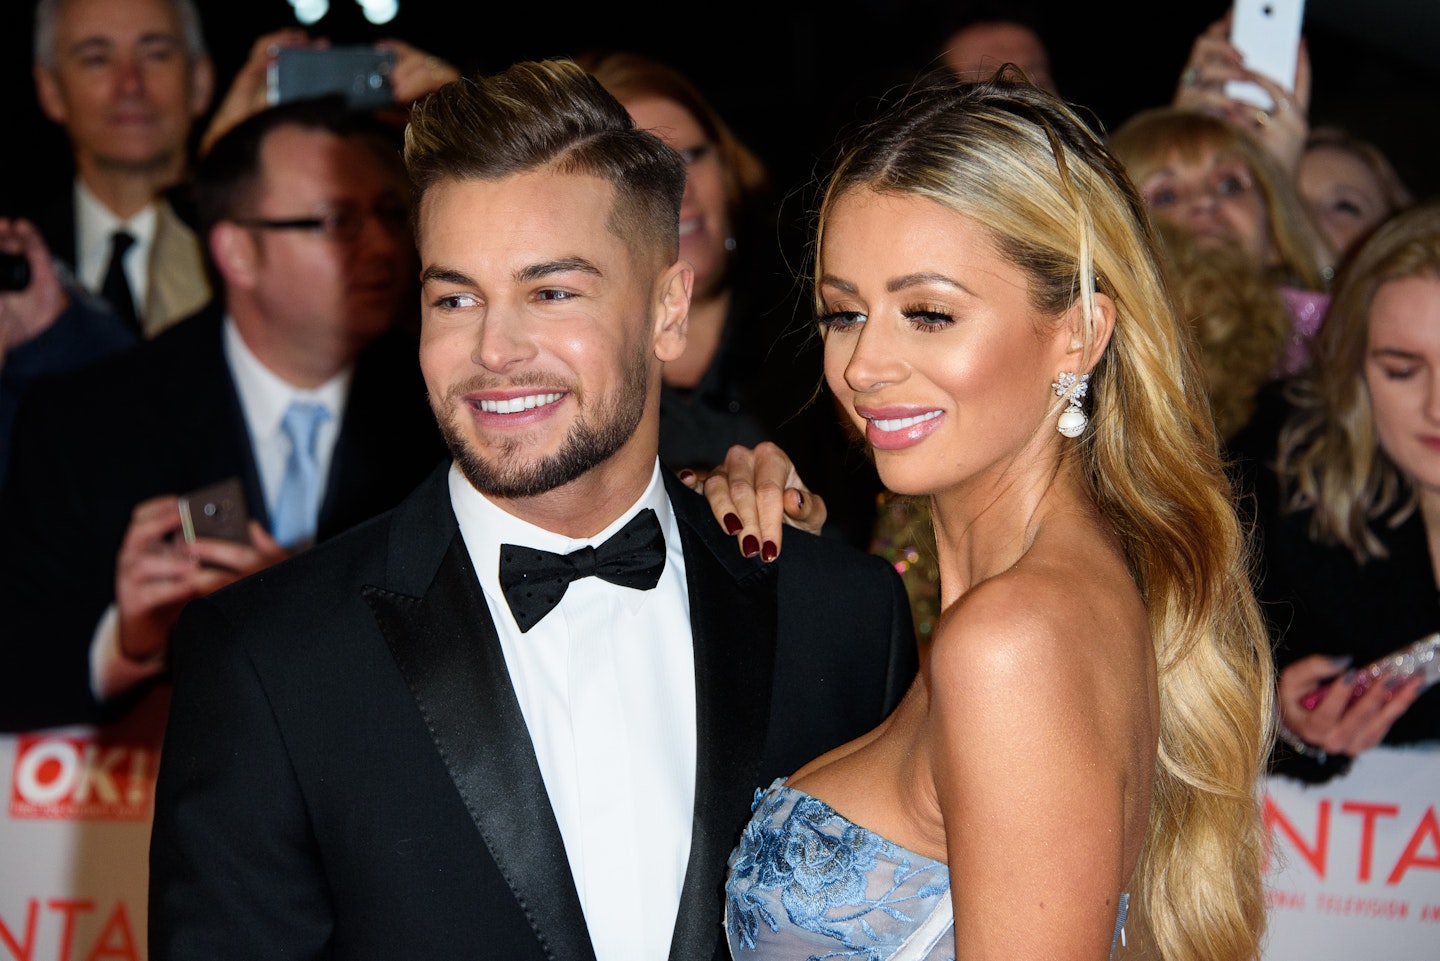 Chris Hughes and Olivia Attwood